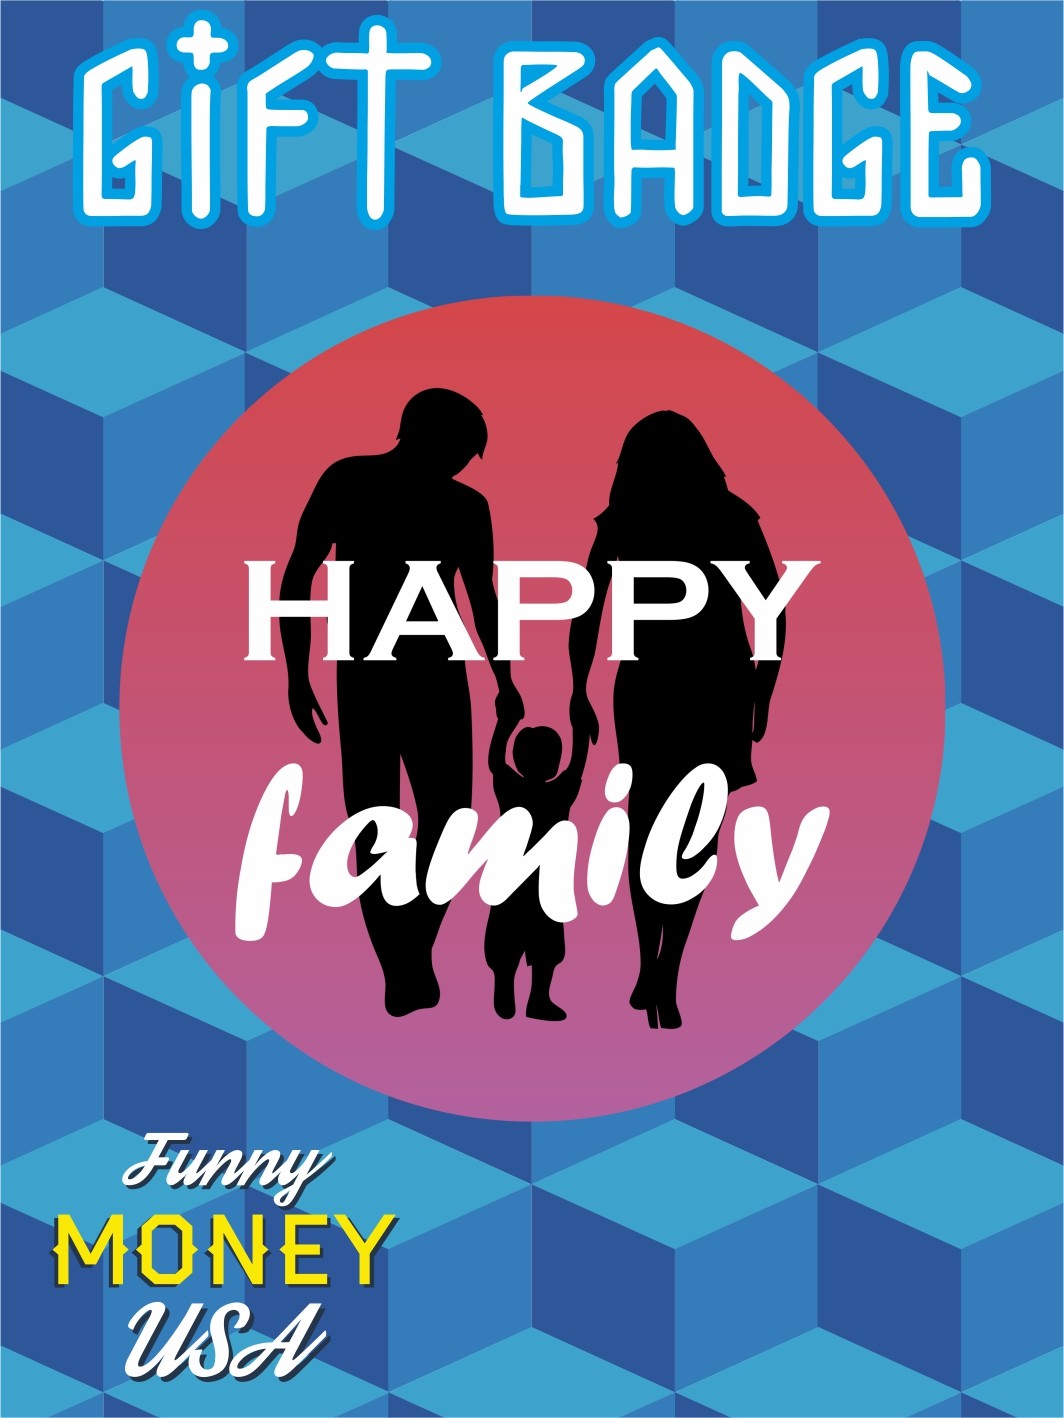 Gift badges "Happy family"